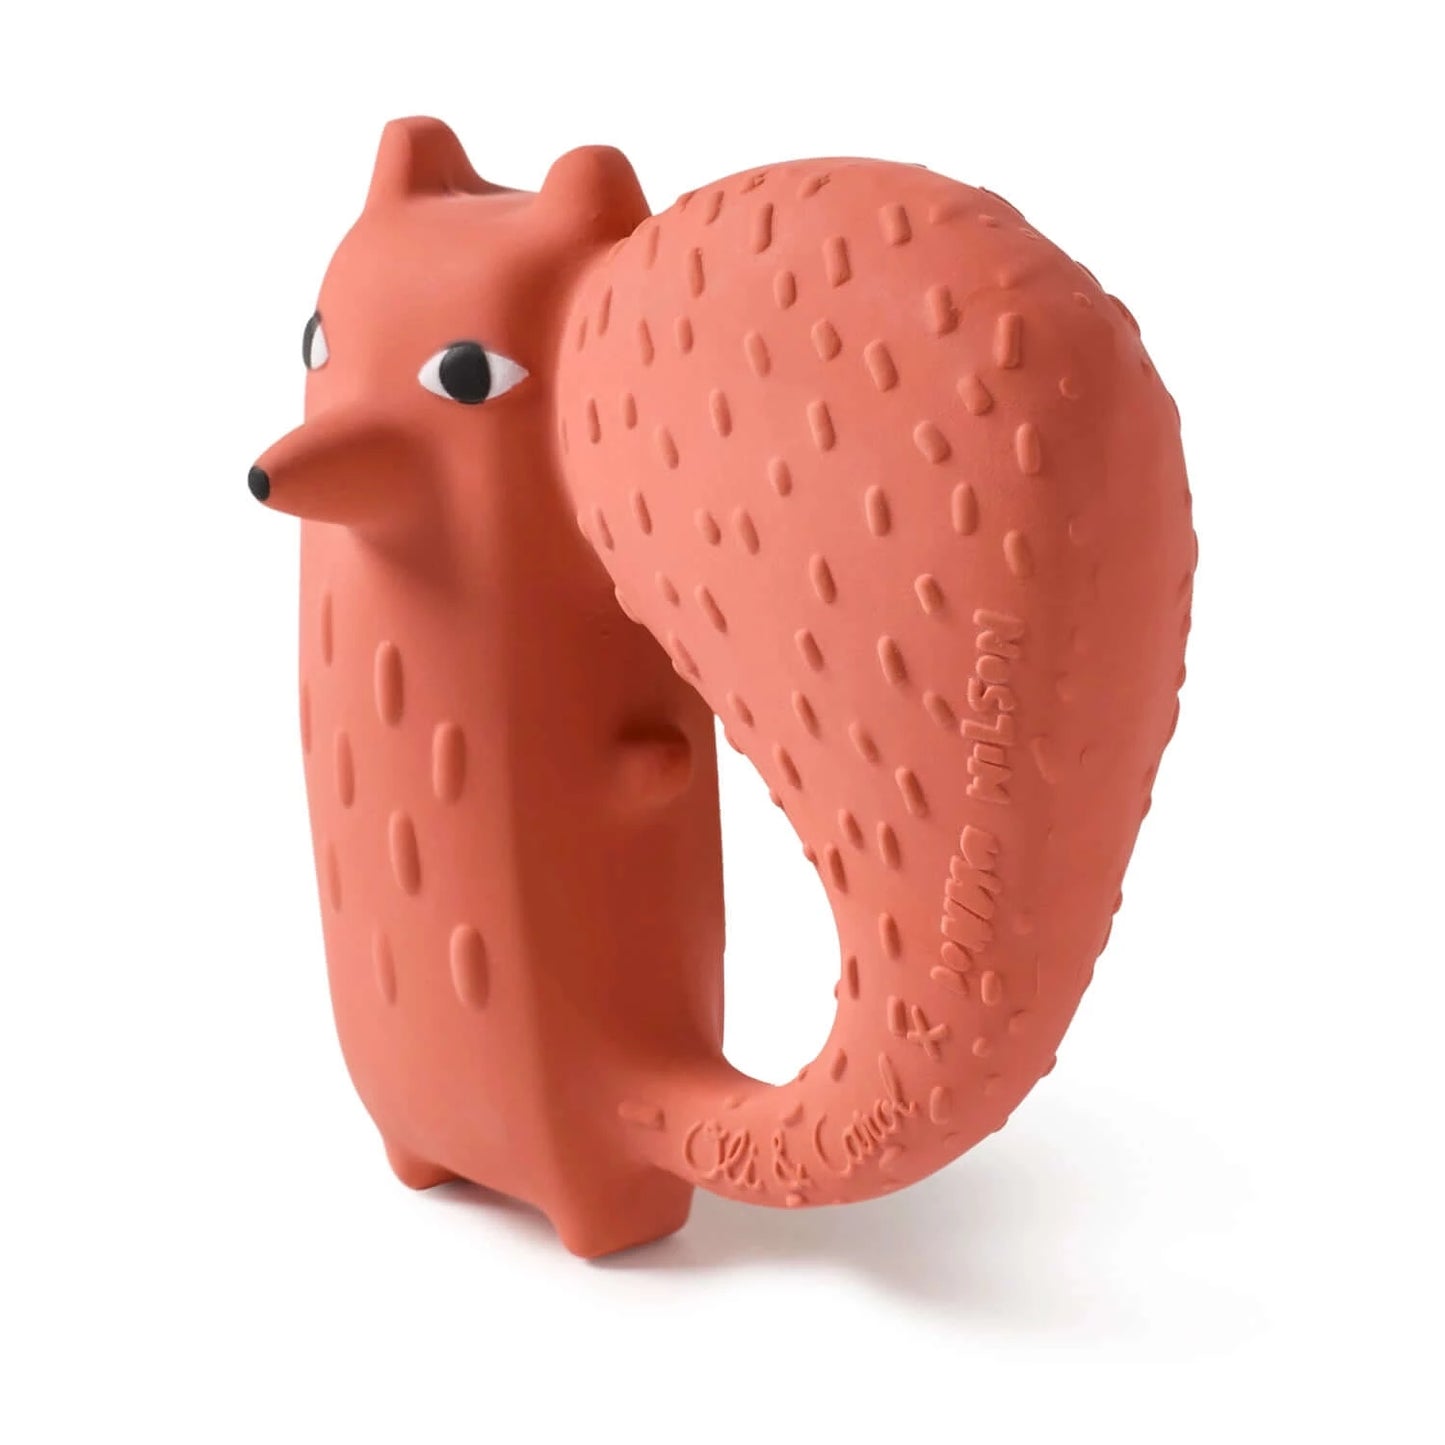 Donna Wilson Natural Rubber Cyril Squirrel Fox Baby Teether